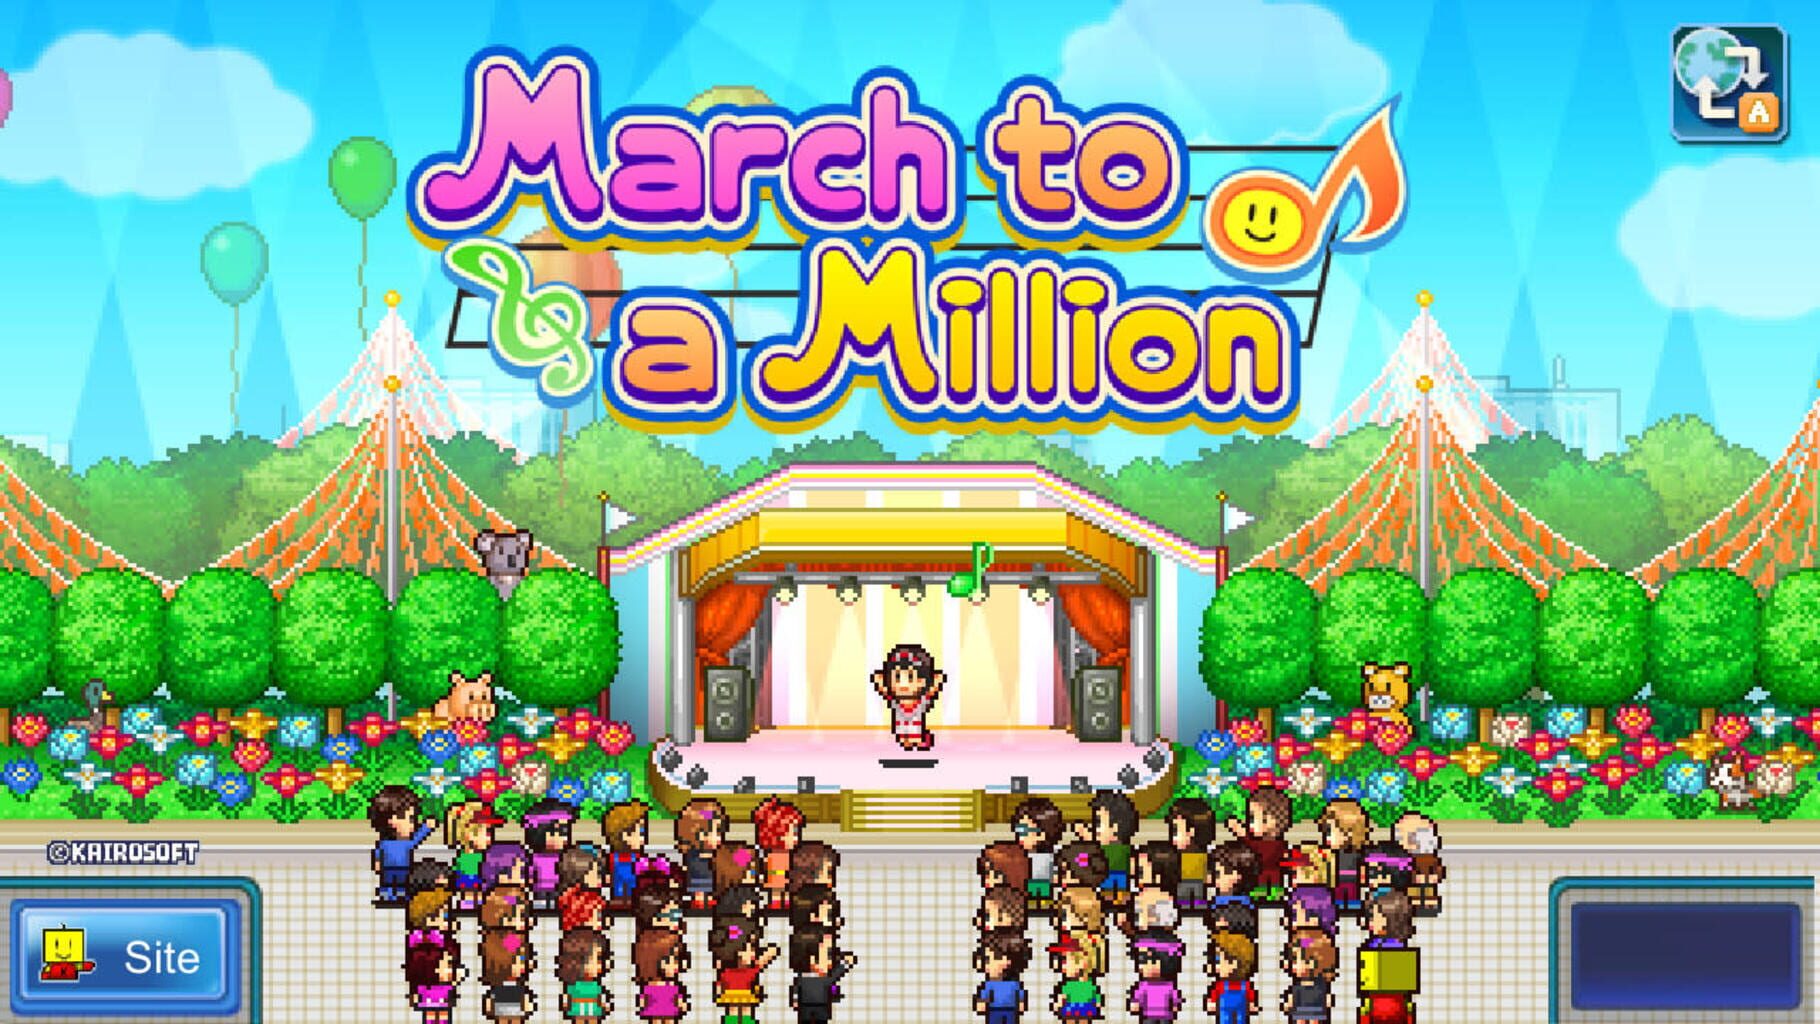 March to a Million screenshot